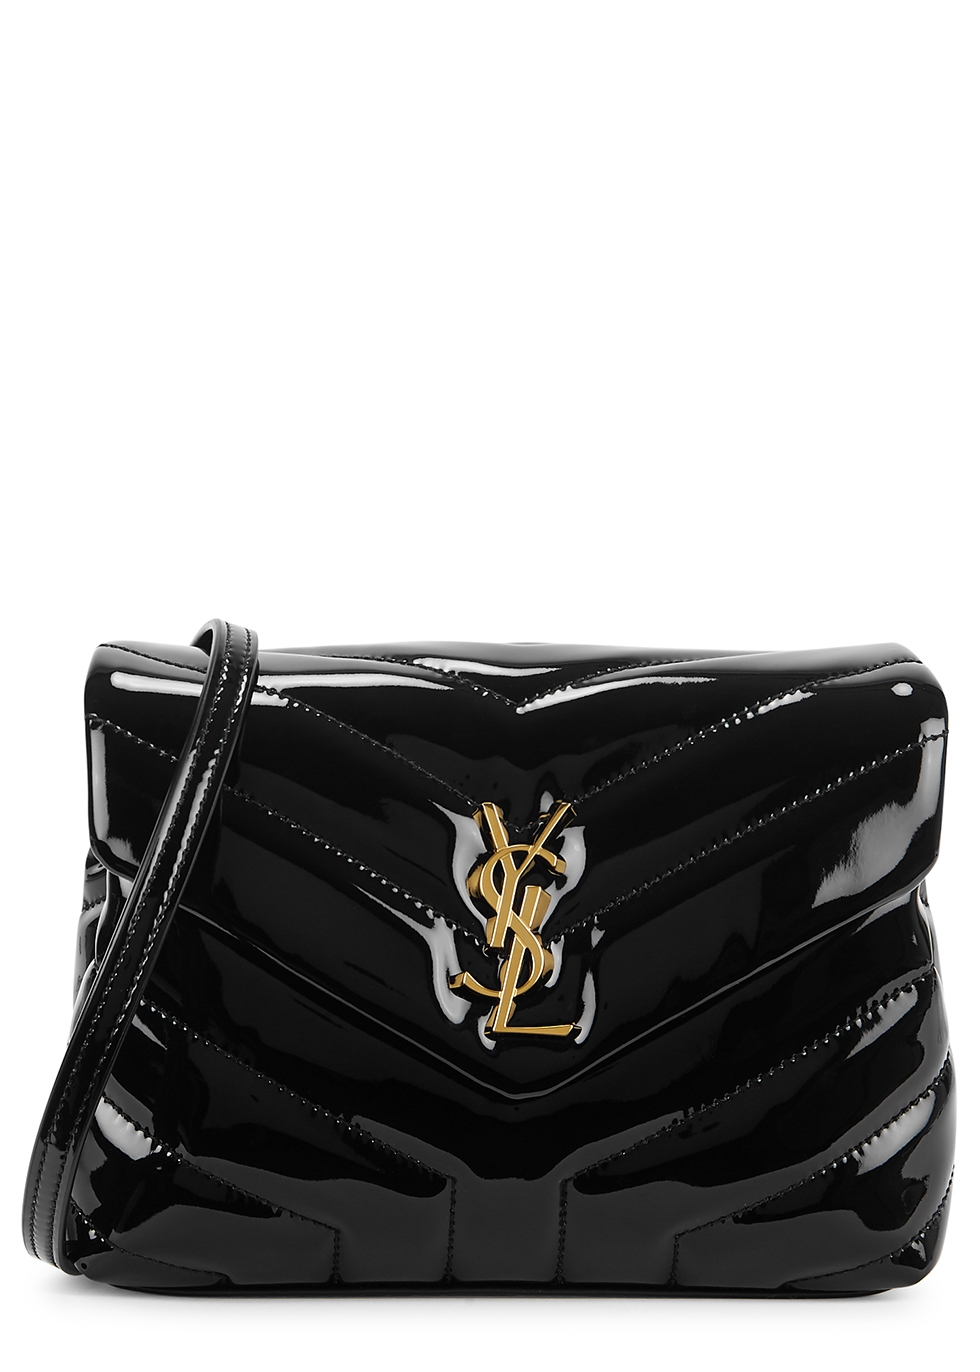 Loulou Toy black patent leather cross-body bag